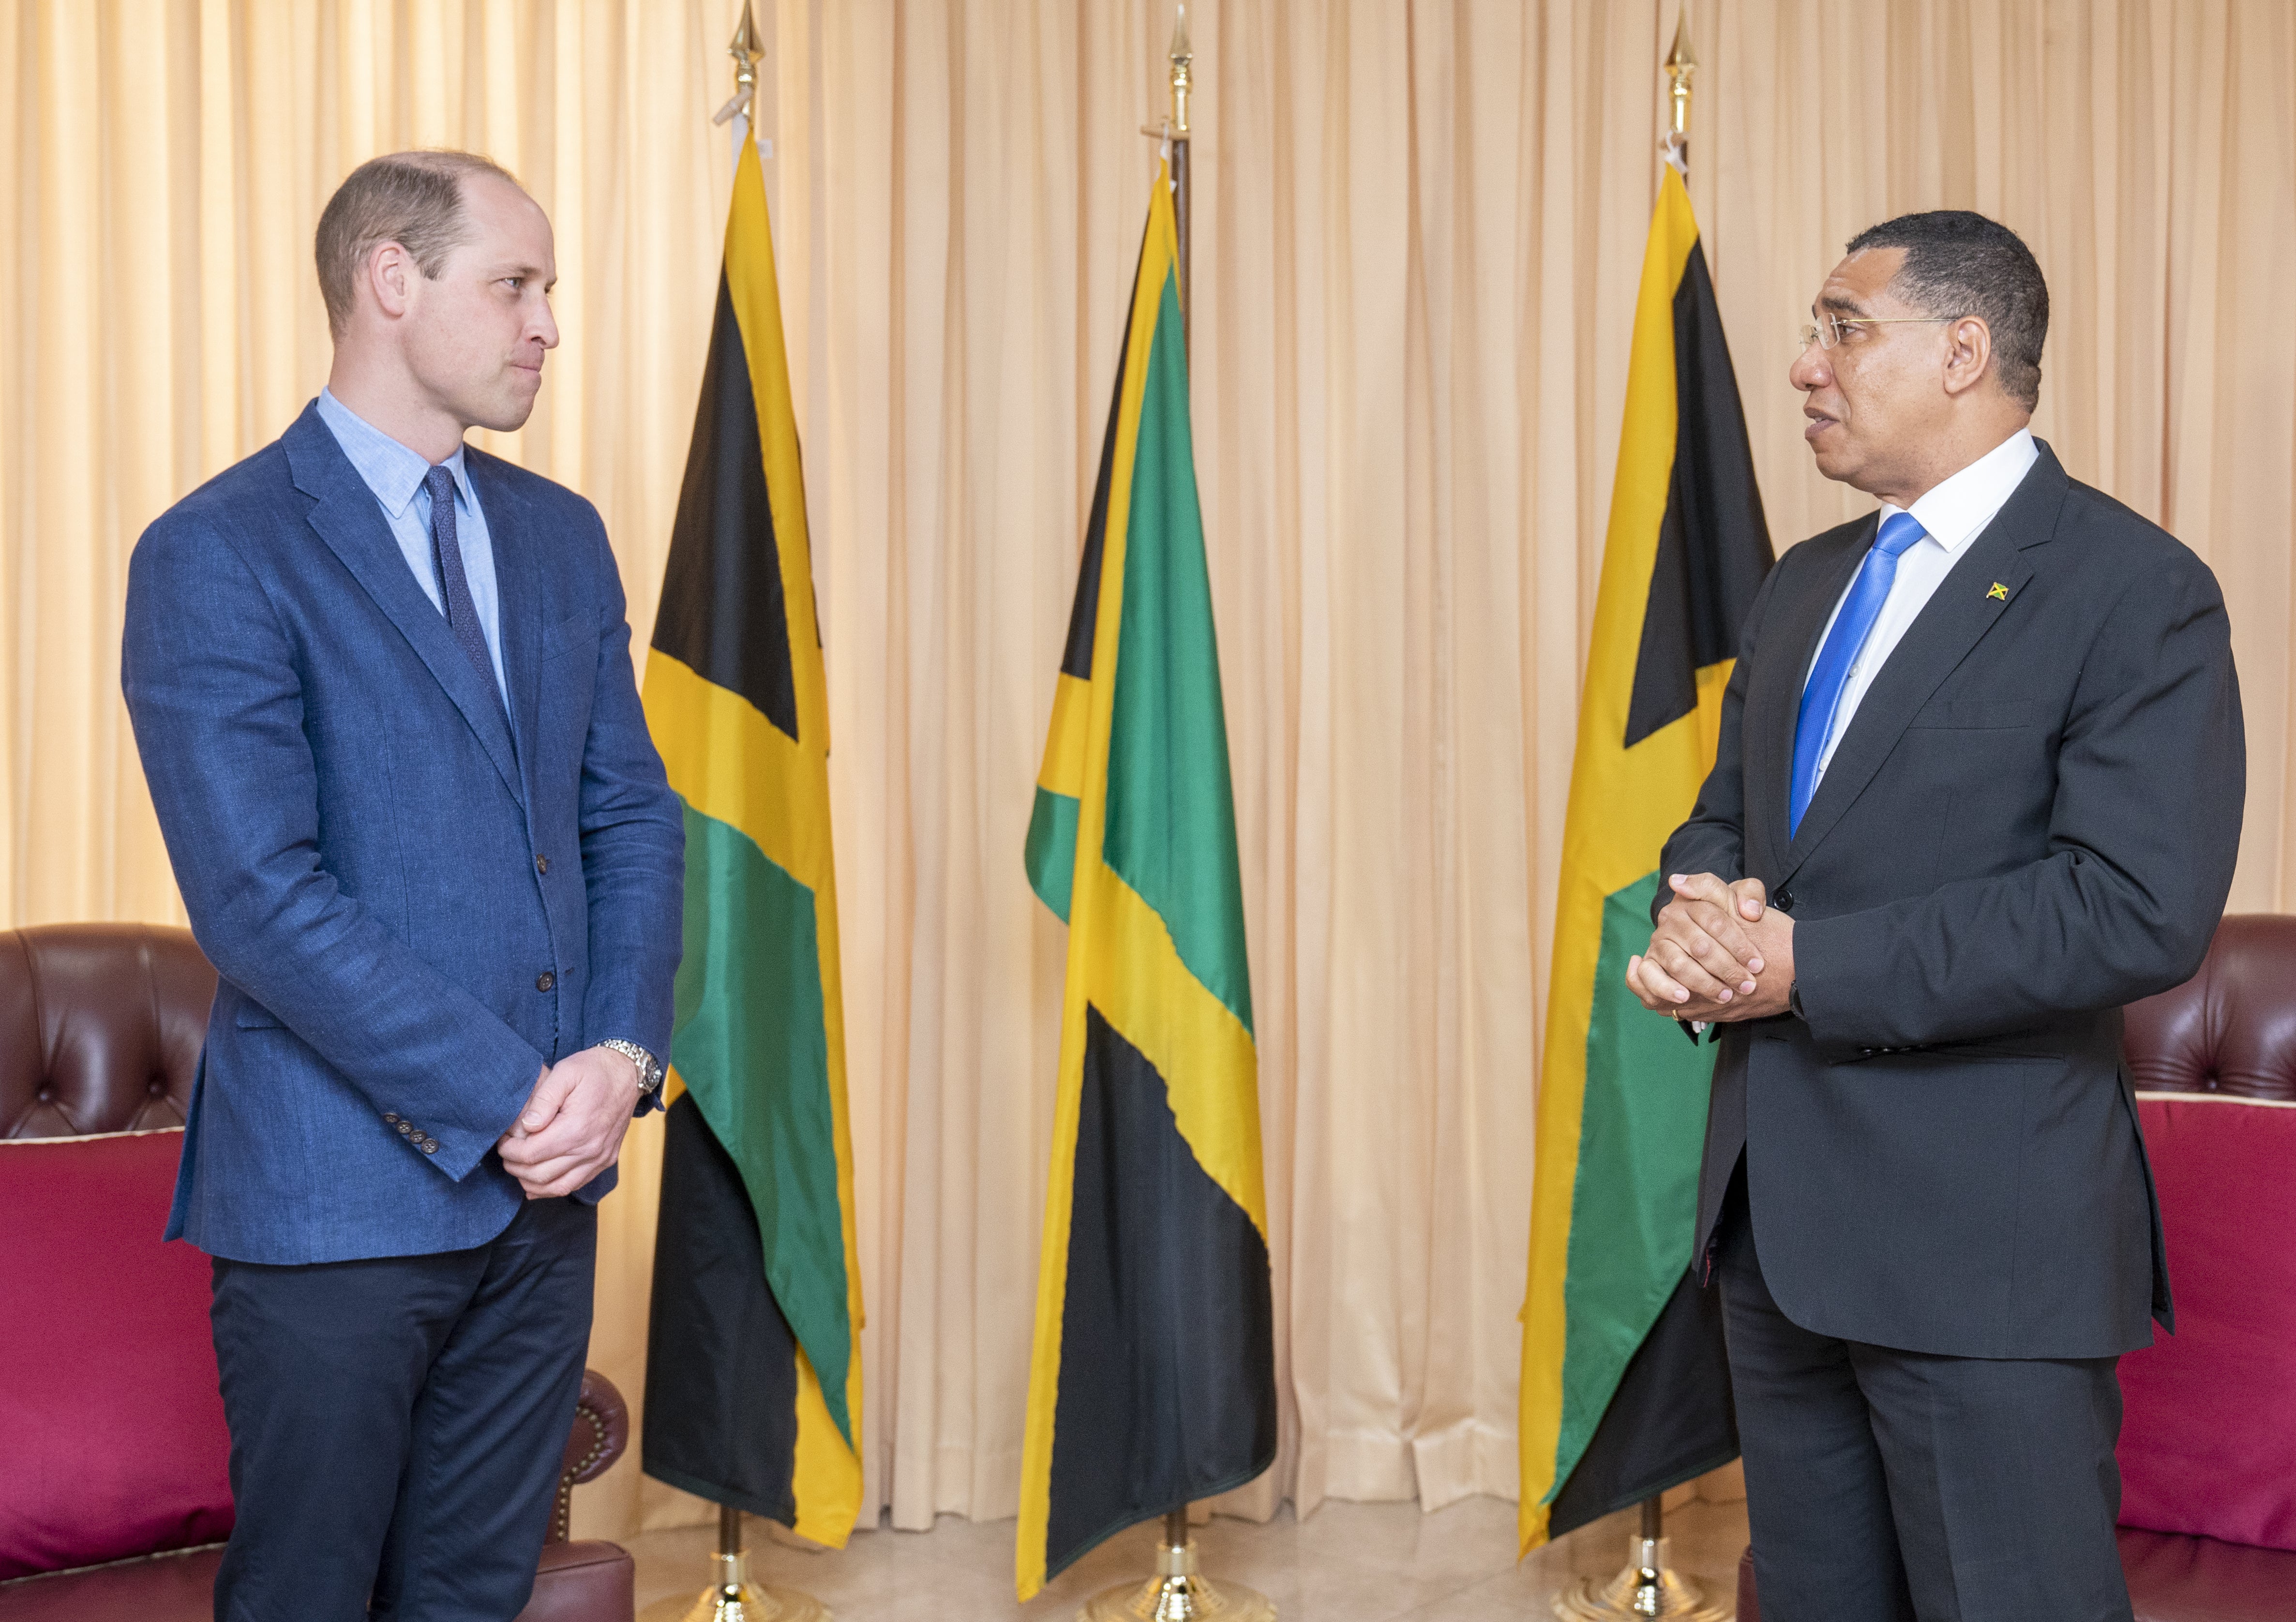 The Duke of Cambridge with Jamaica’s PM Andrew Holness who suggested to the royal his nation may become a republic